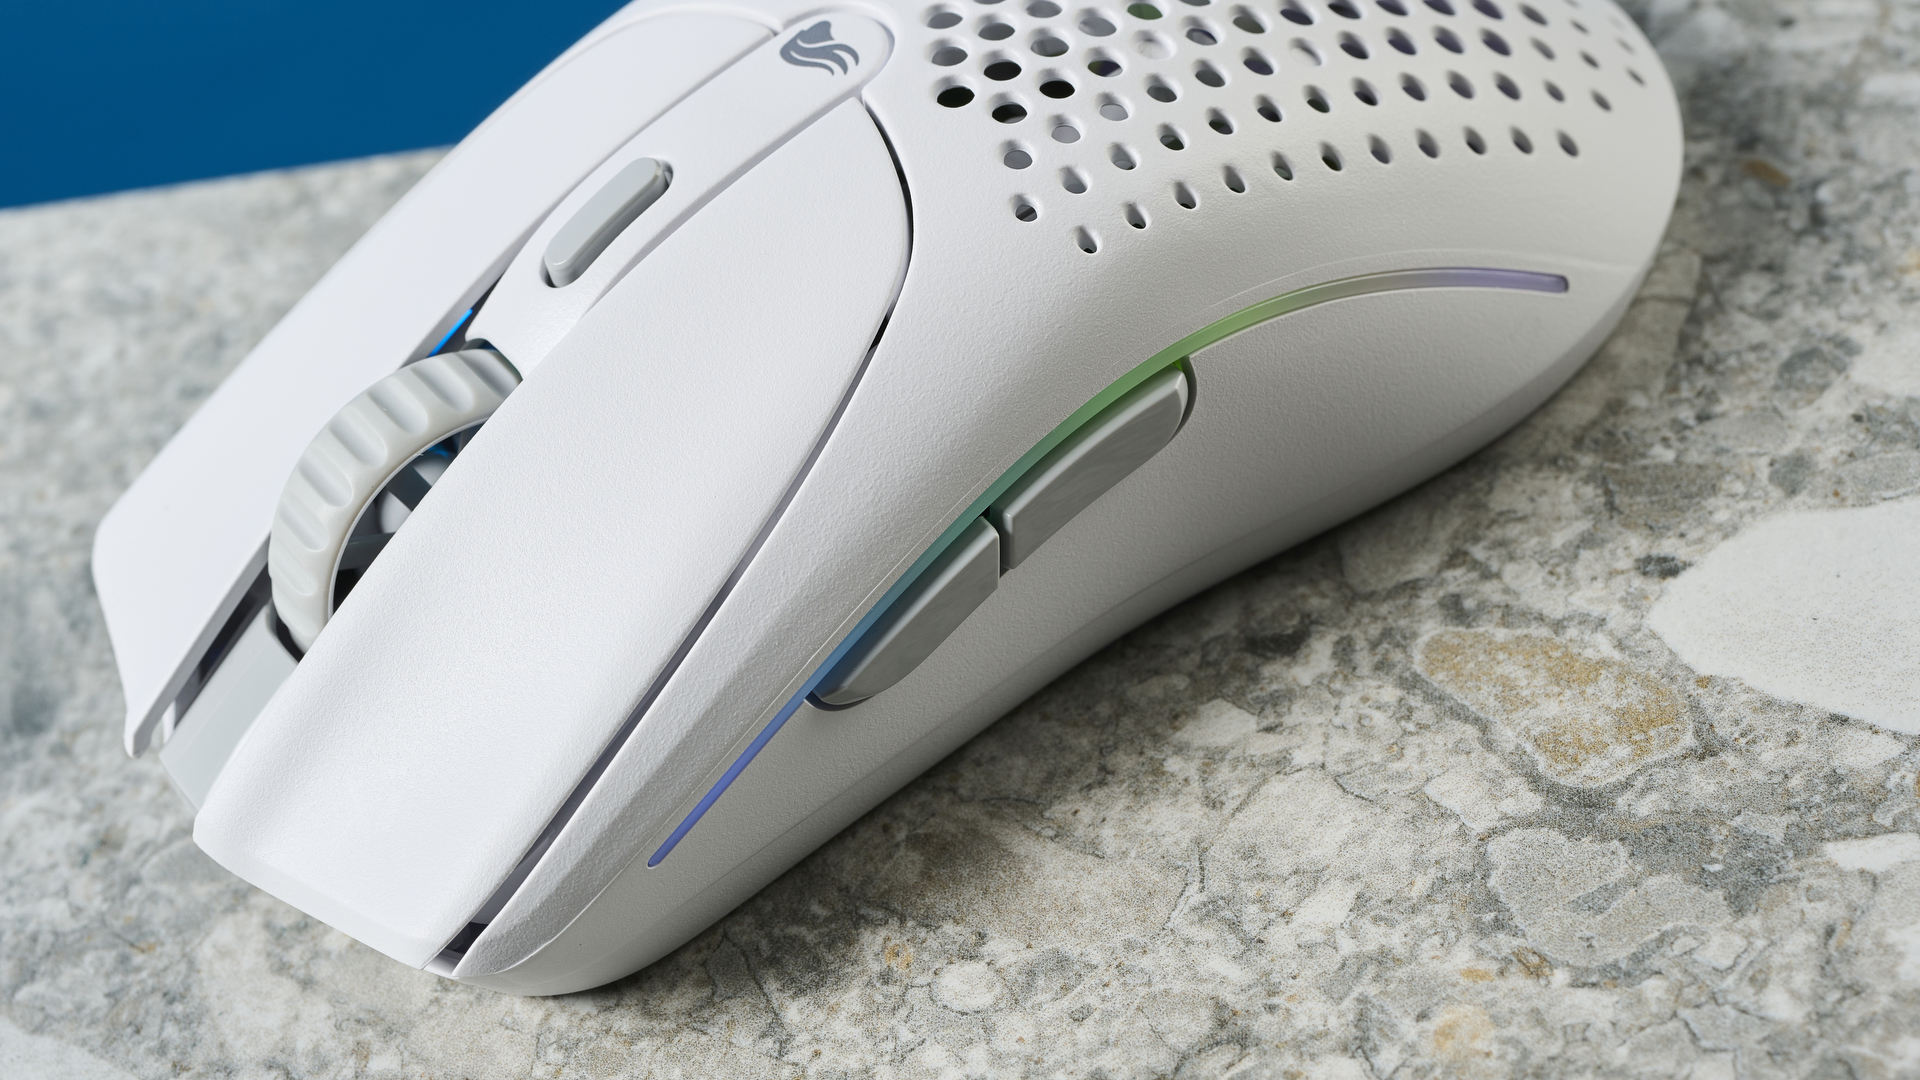 A white Glorious Model O 2 wireless gaming mouse